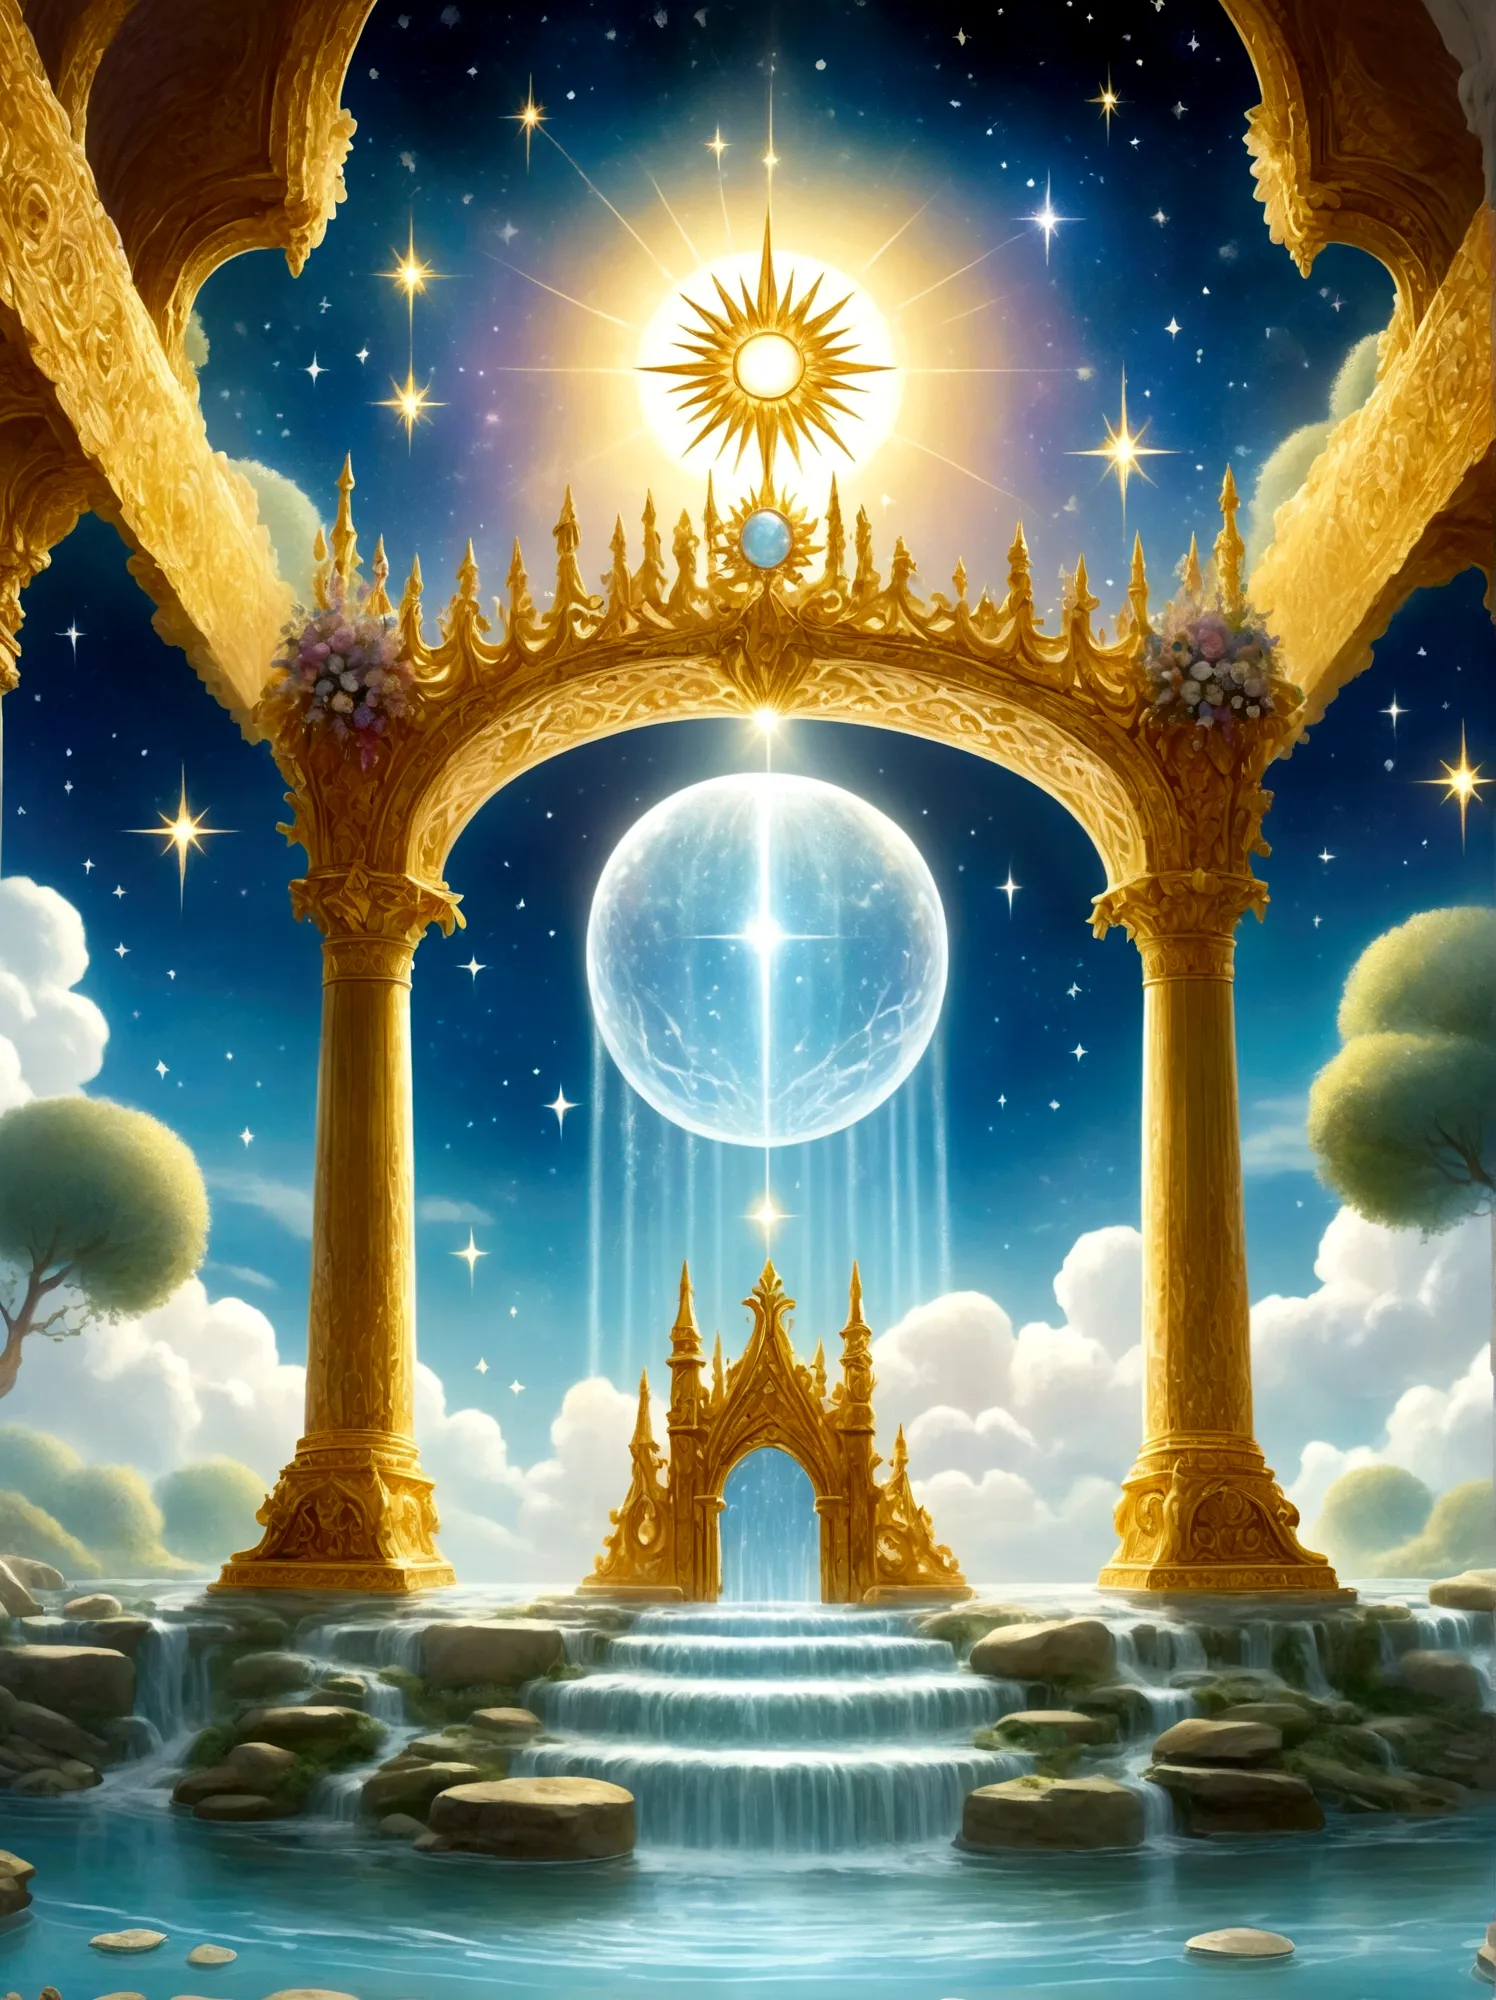 Imagine a majestic throne room beyond the human realm, as described in the first book of Enoch, The room is filled with grandeur...